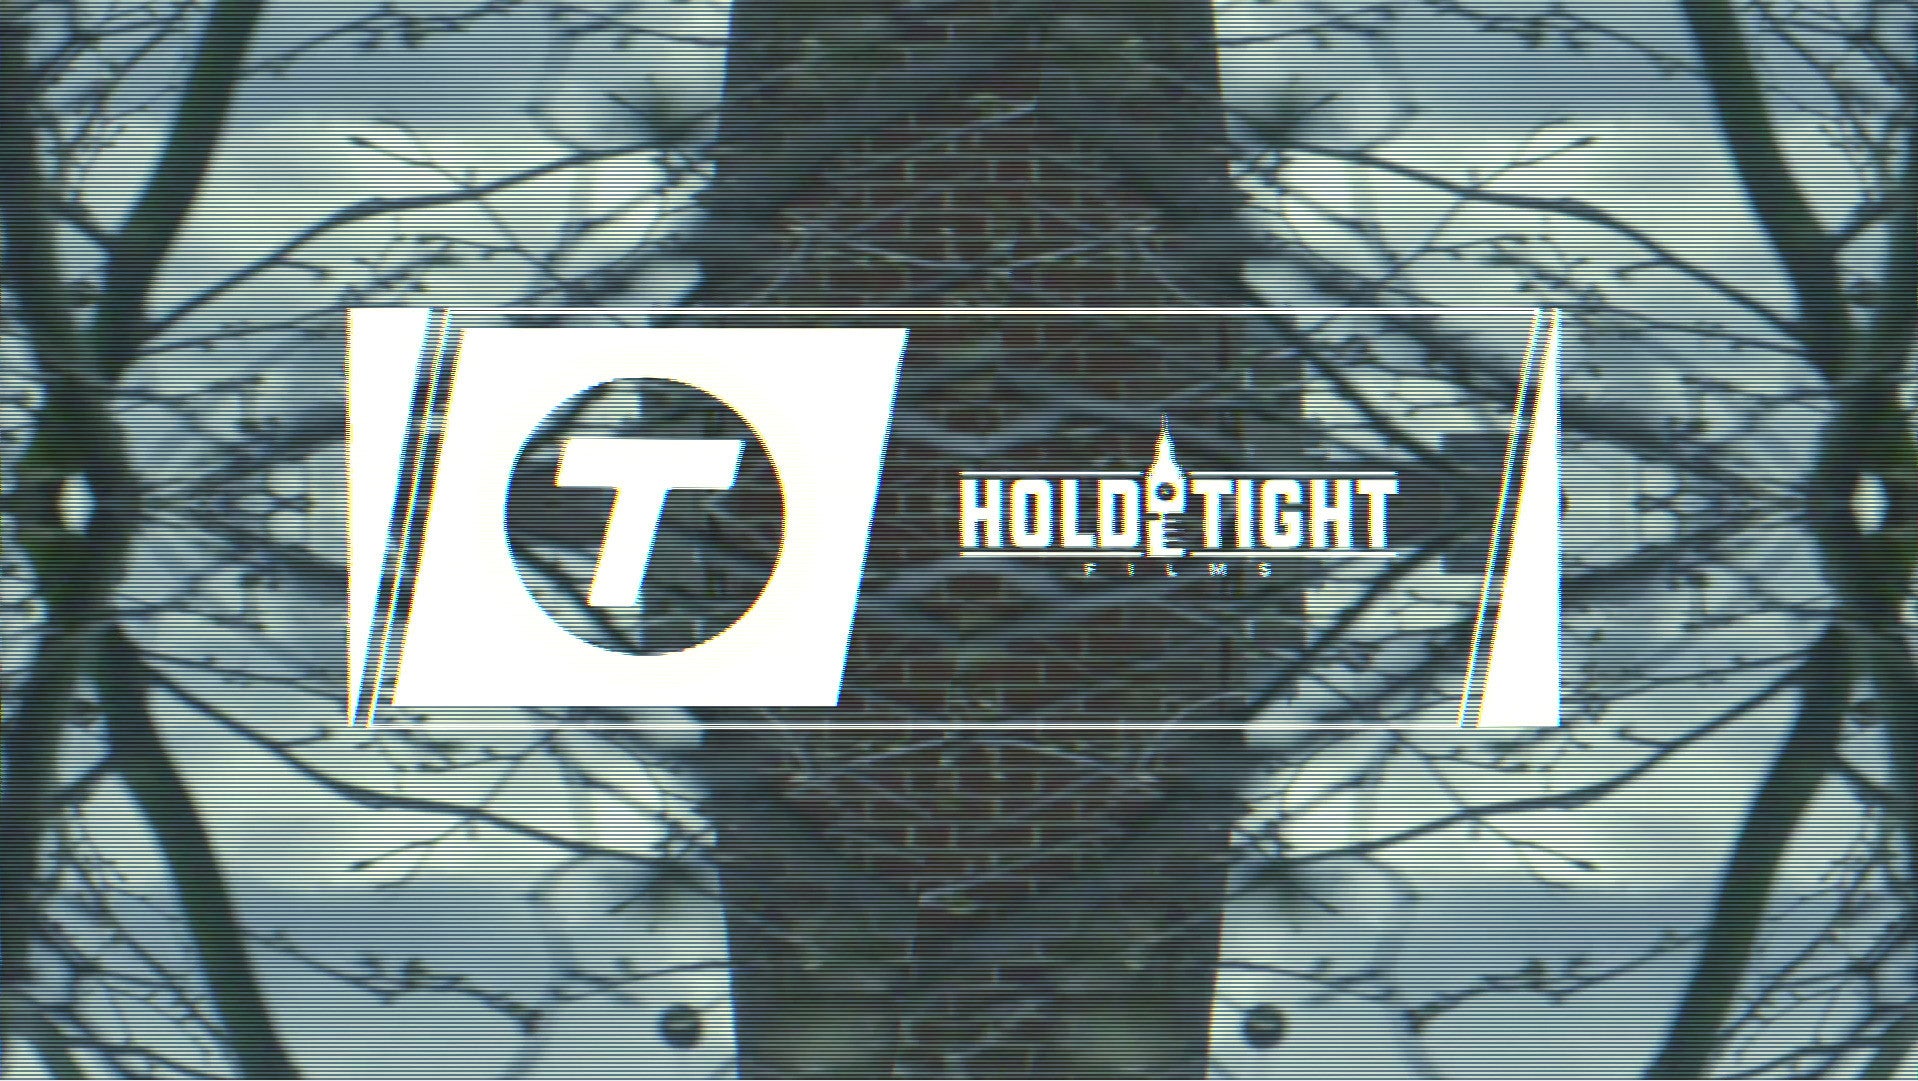 Theobalds Cap Co. Team up with Hold tight Henry to bring you 'Athletics'